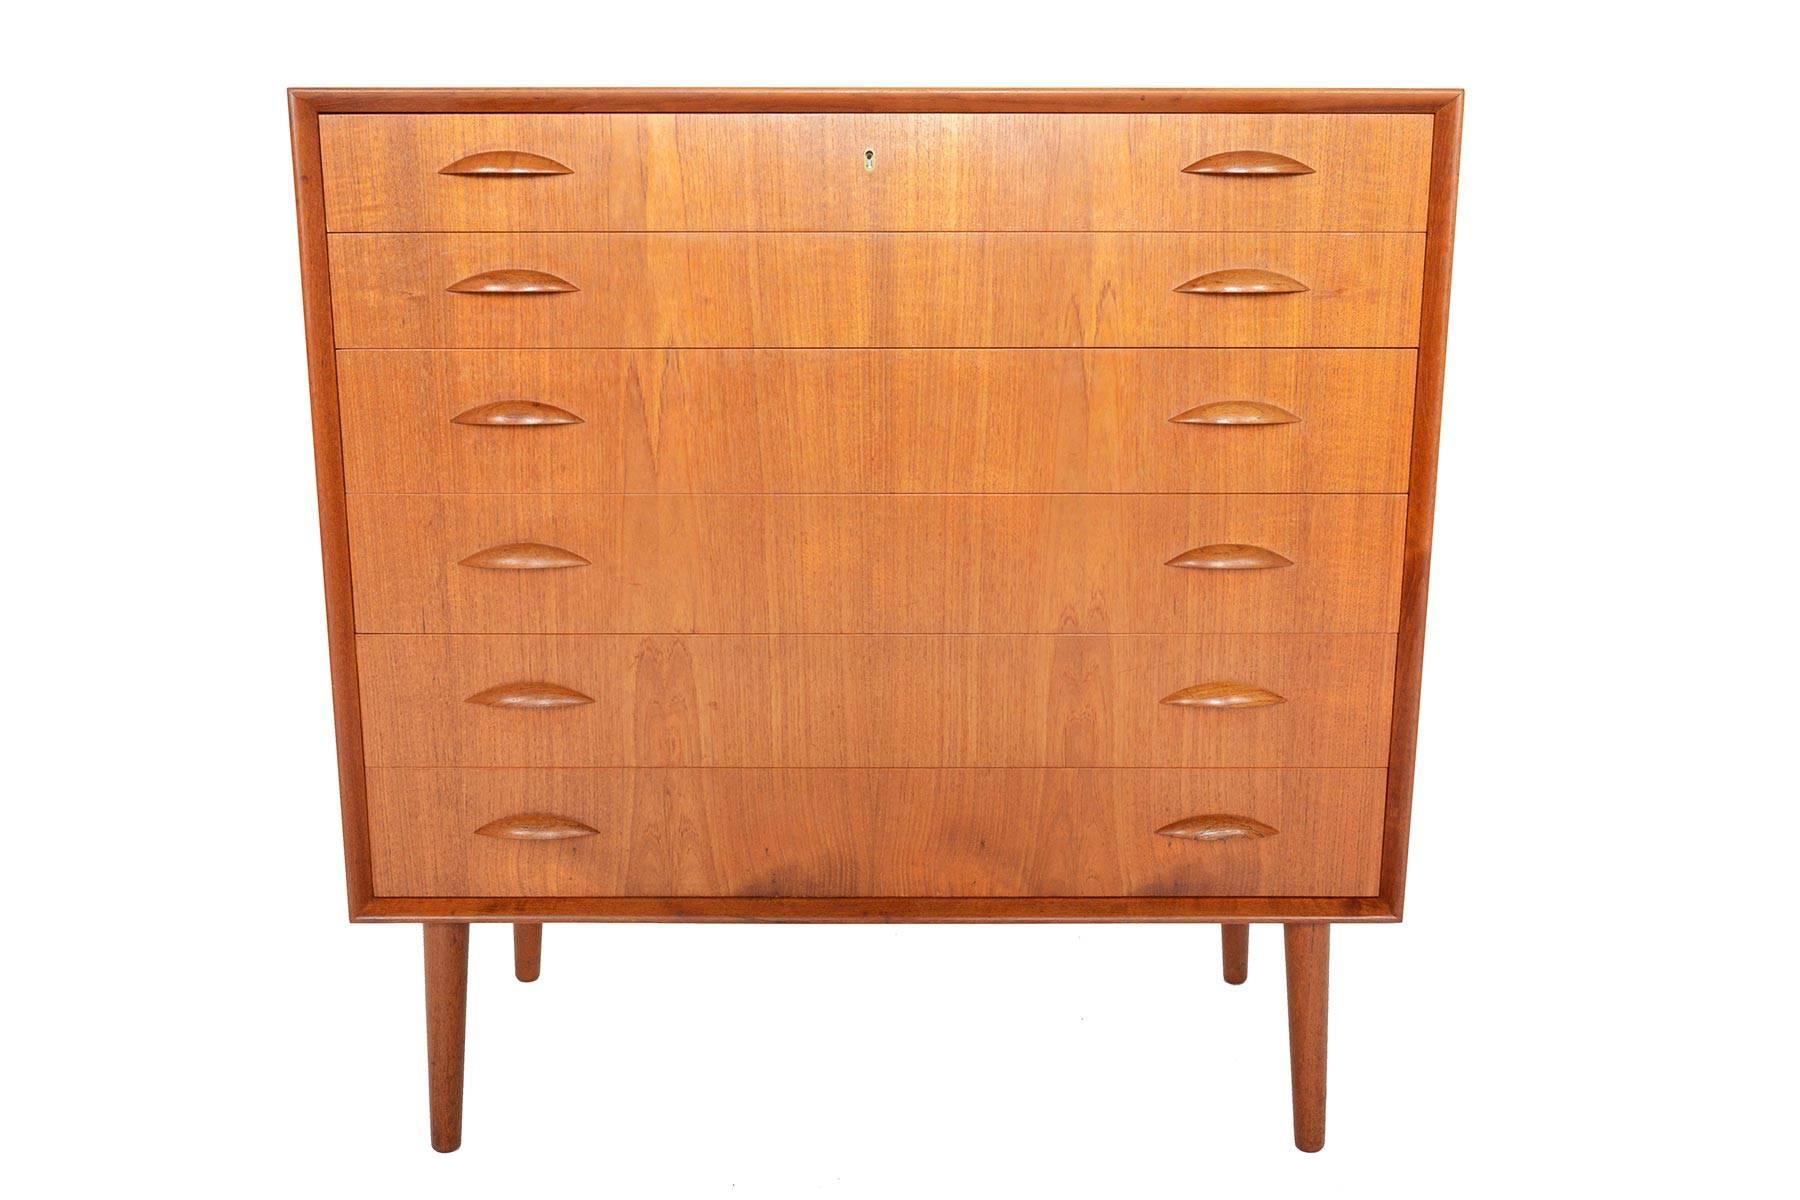 This handsome teak dresser was designed by Johannes Sorth for Nexø Møbelfabrik in the 1960s. Two carved teak pulls adorn each drawer face. With superior craftsmanship throughout, the case features mitered edges and built- in dividers in the top